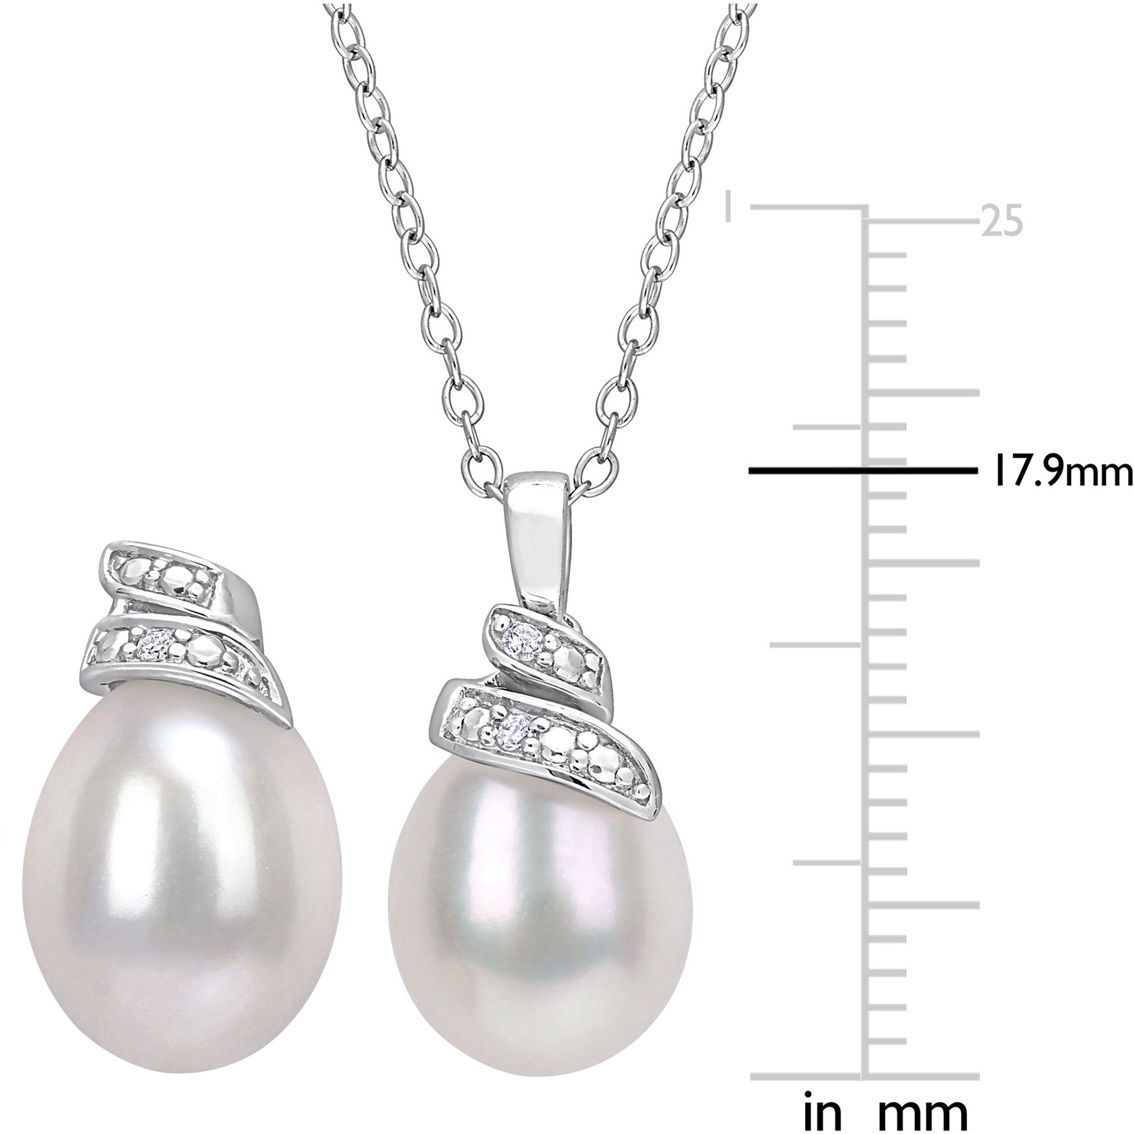 Sofia B. Sterling Silver Cultured Freshwater Pearl Diamond Accent 2 pc. Jewelry Set - Image 3 of 3